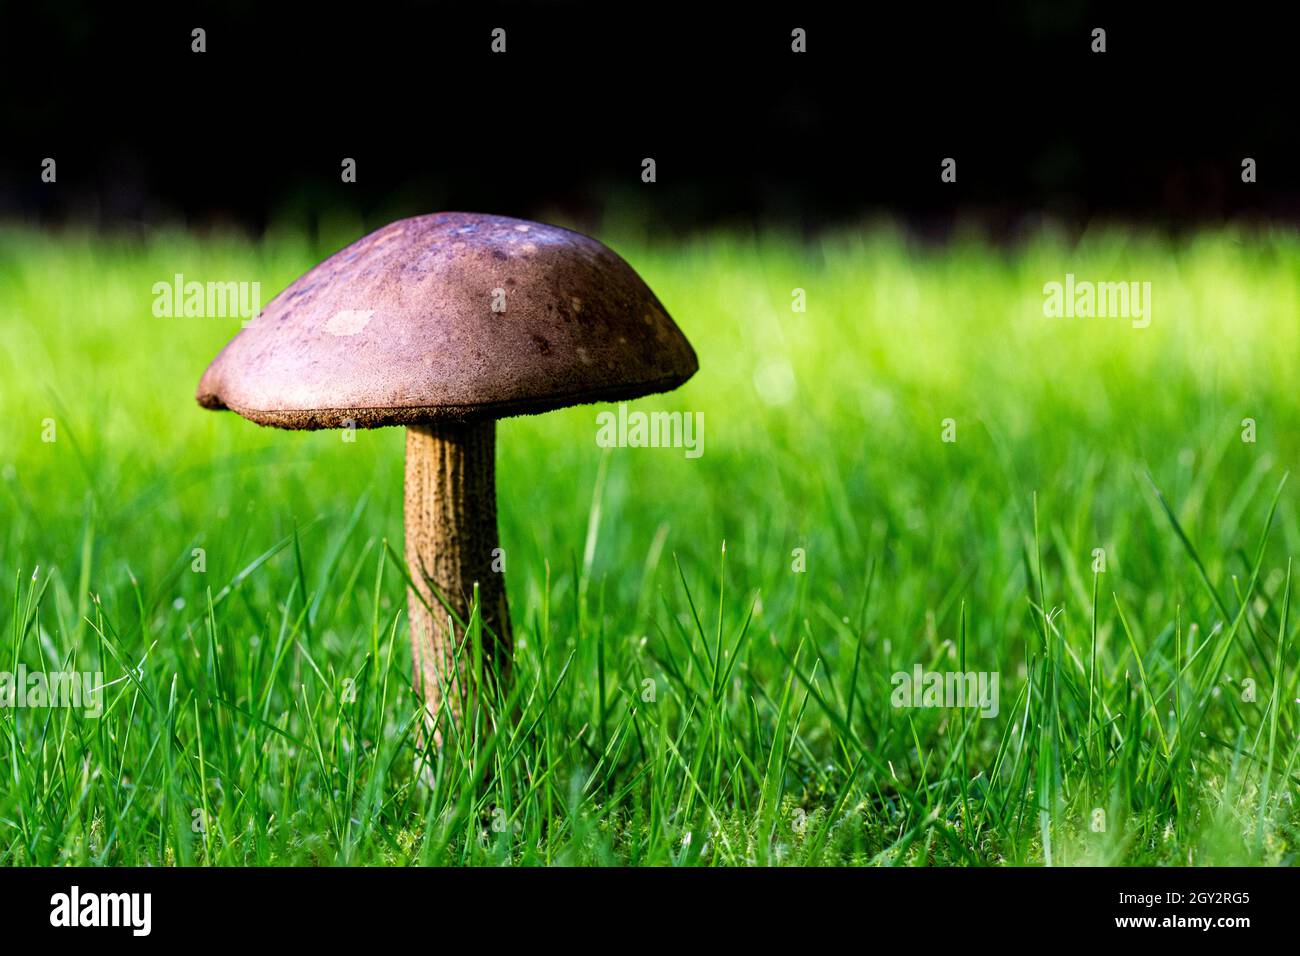 Ground shot of fully formed mushroom, fungus, fungi on a green lawn with a dark hedge in the background. Stock Photo